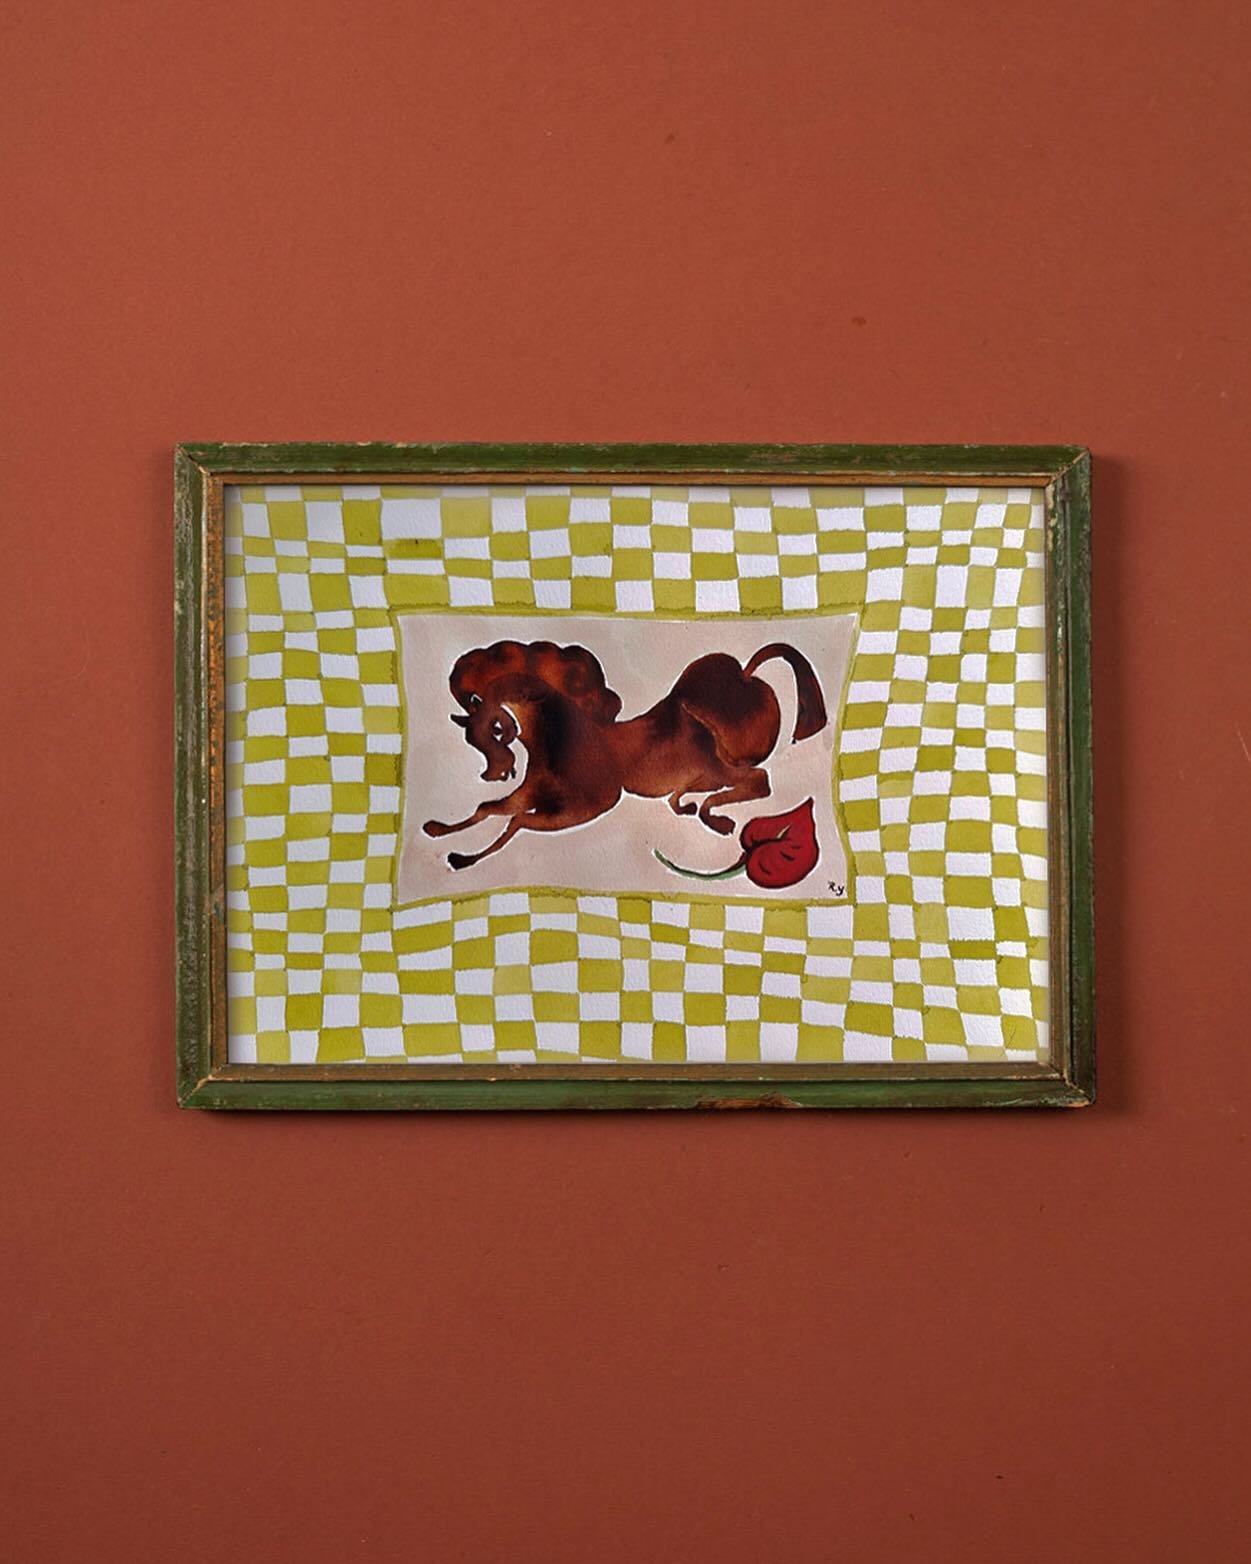 &lsquo;Arthur and The Anthurium&rsquo; psychedelic wavy checkered horse art print featured in a vintage old wooden green frame and terracotta painted walls.

What are your views on buying art already framed or solely the painting or artprint itself?
